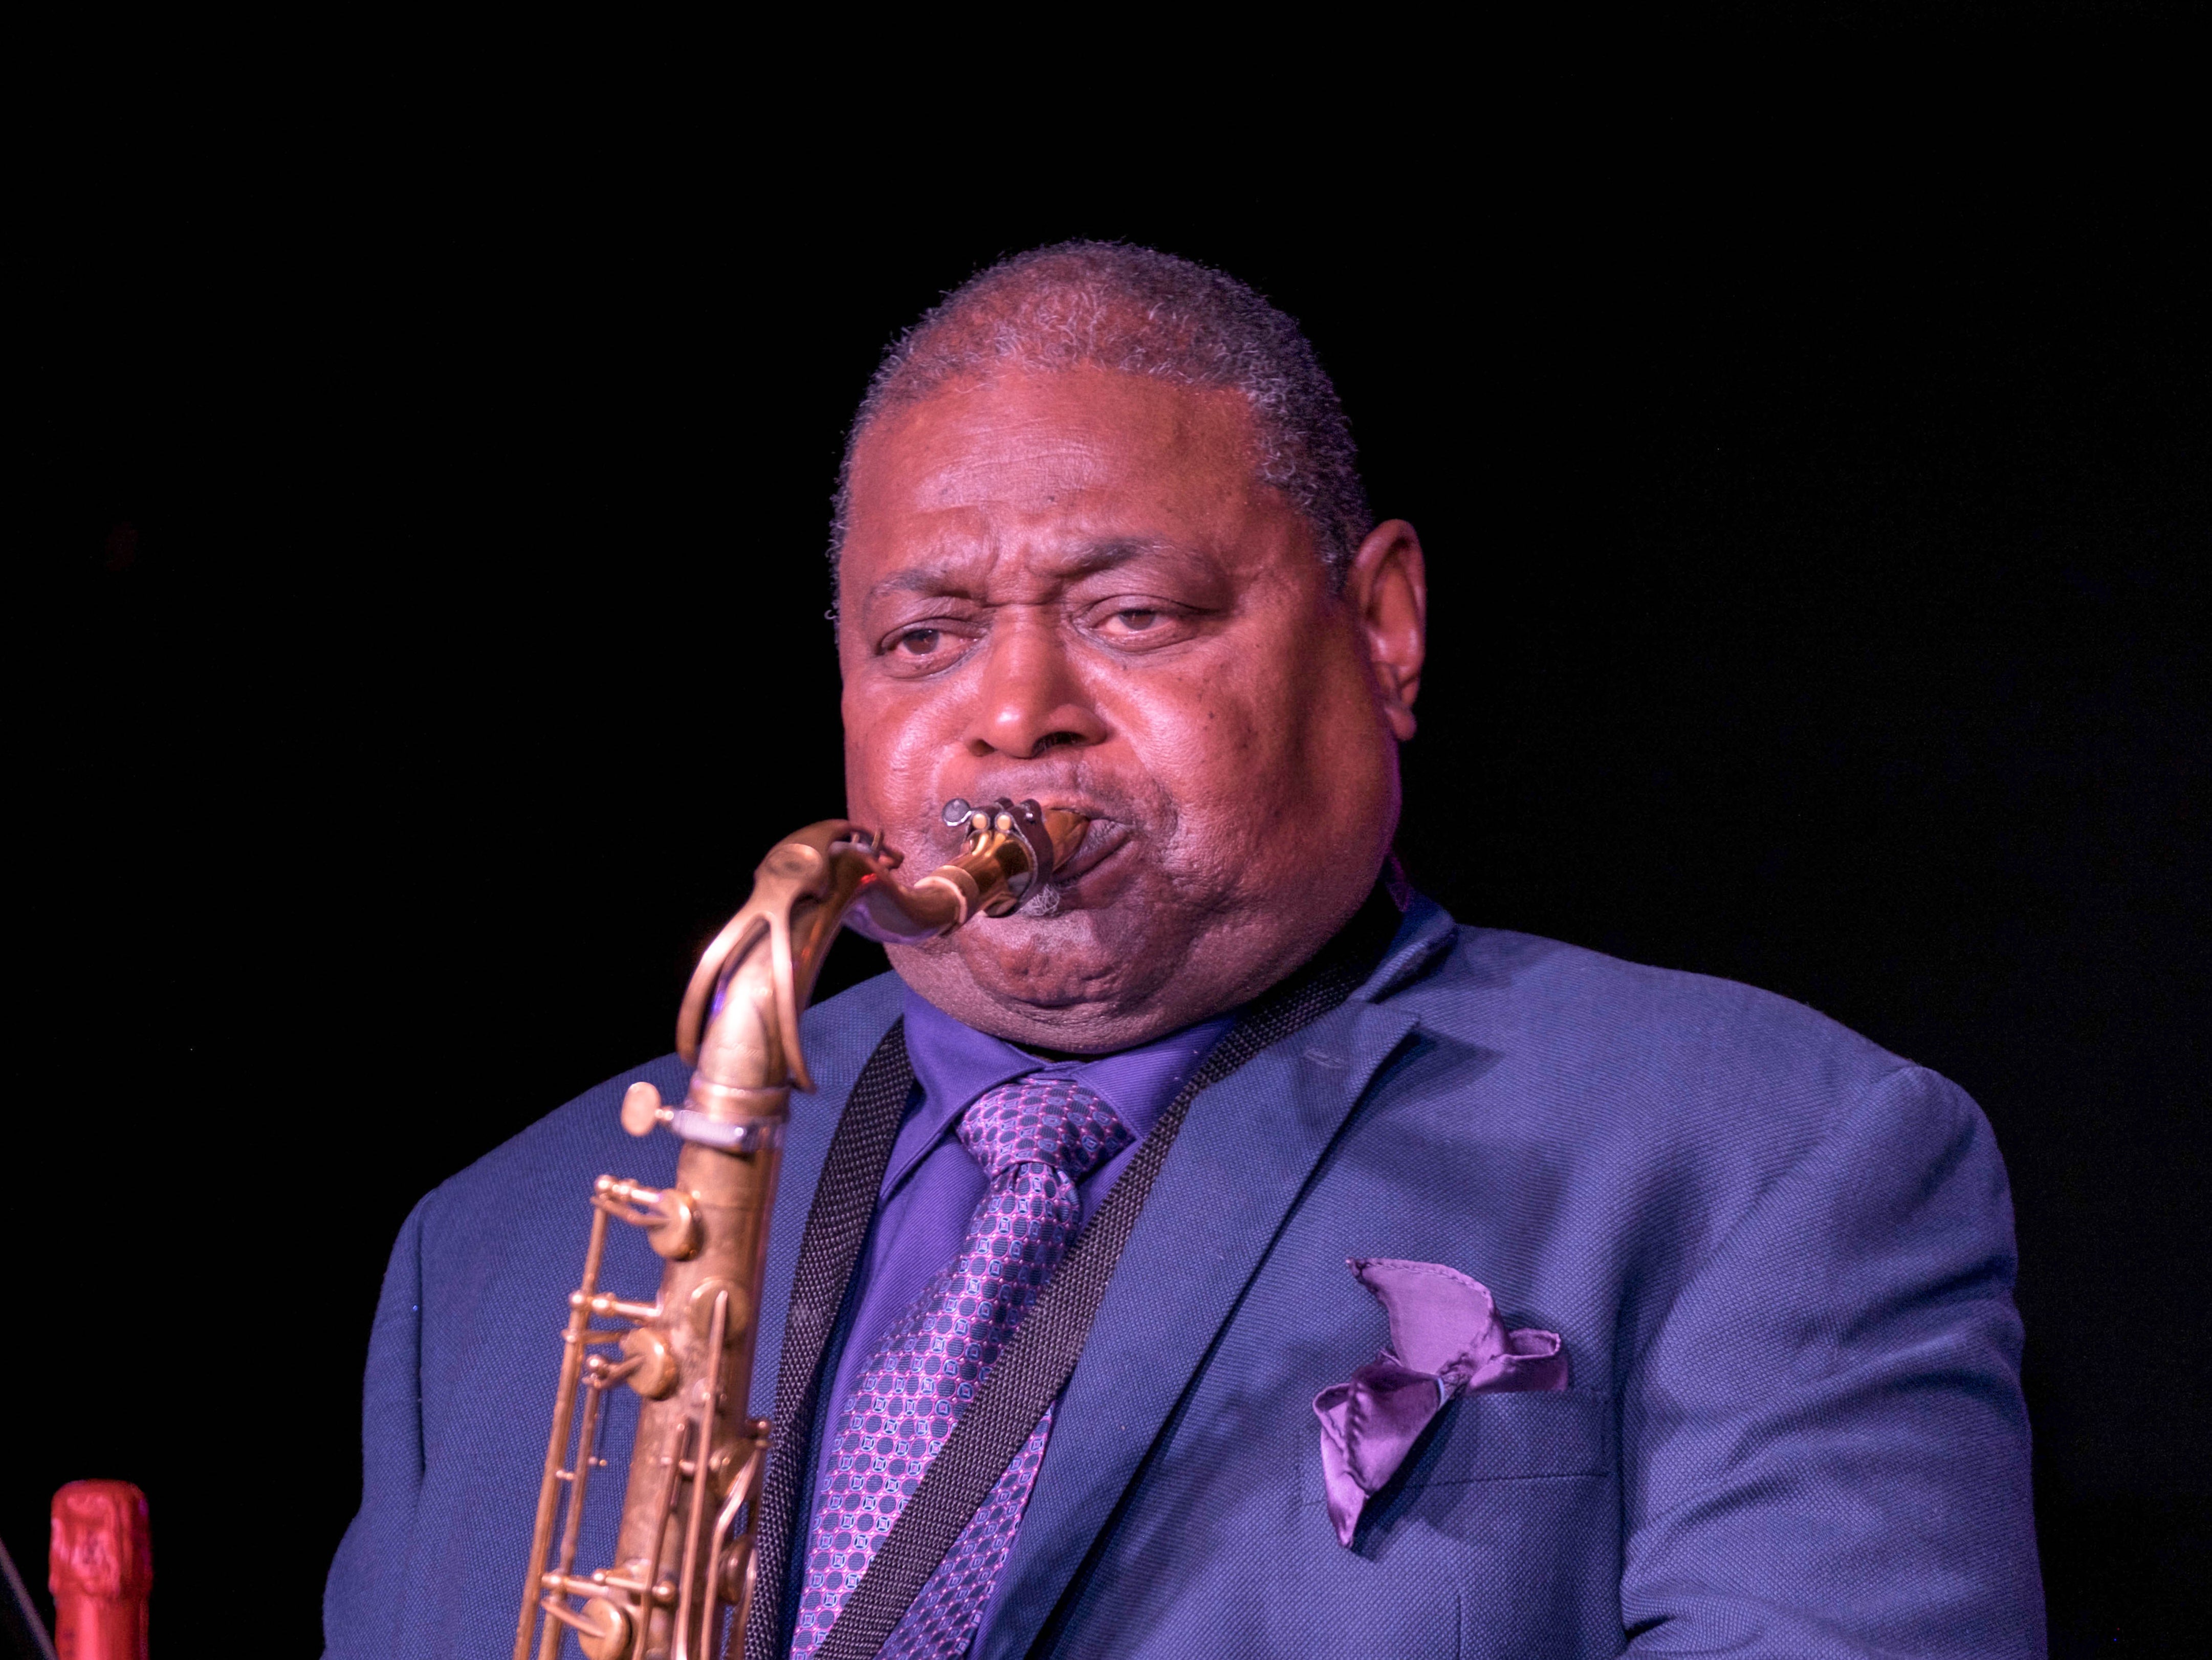 Ellis began his career as a jazz saxophonist and fronted rhythm-and-blues bands